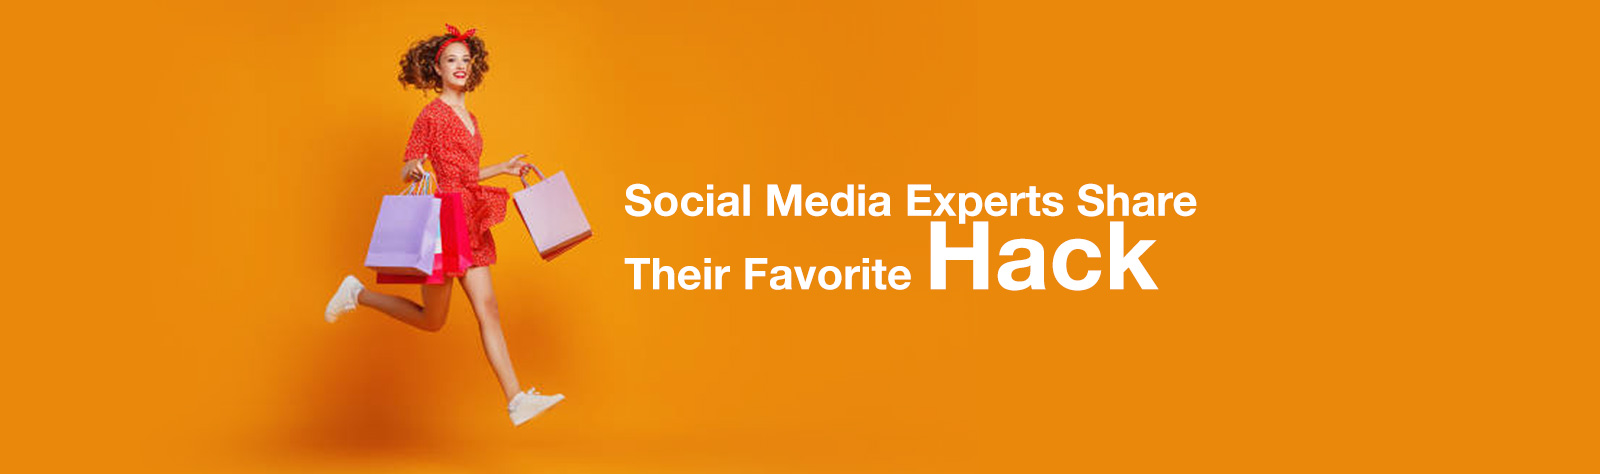 Social Media Experts Share Their Favorite "Hack" For Better Organic Performance